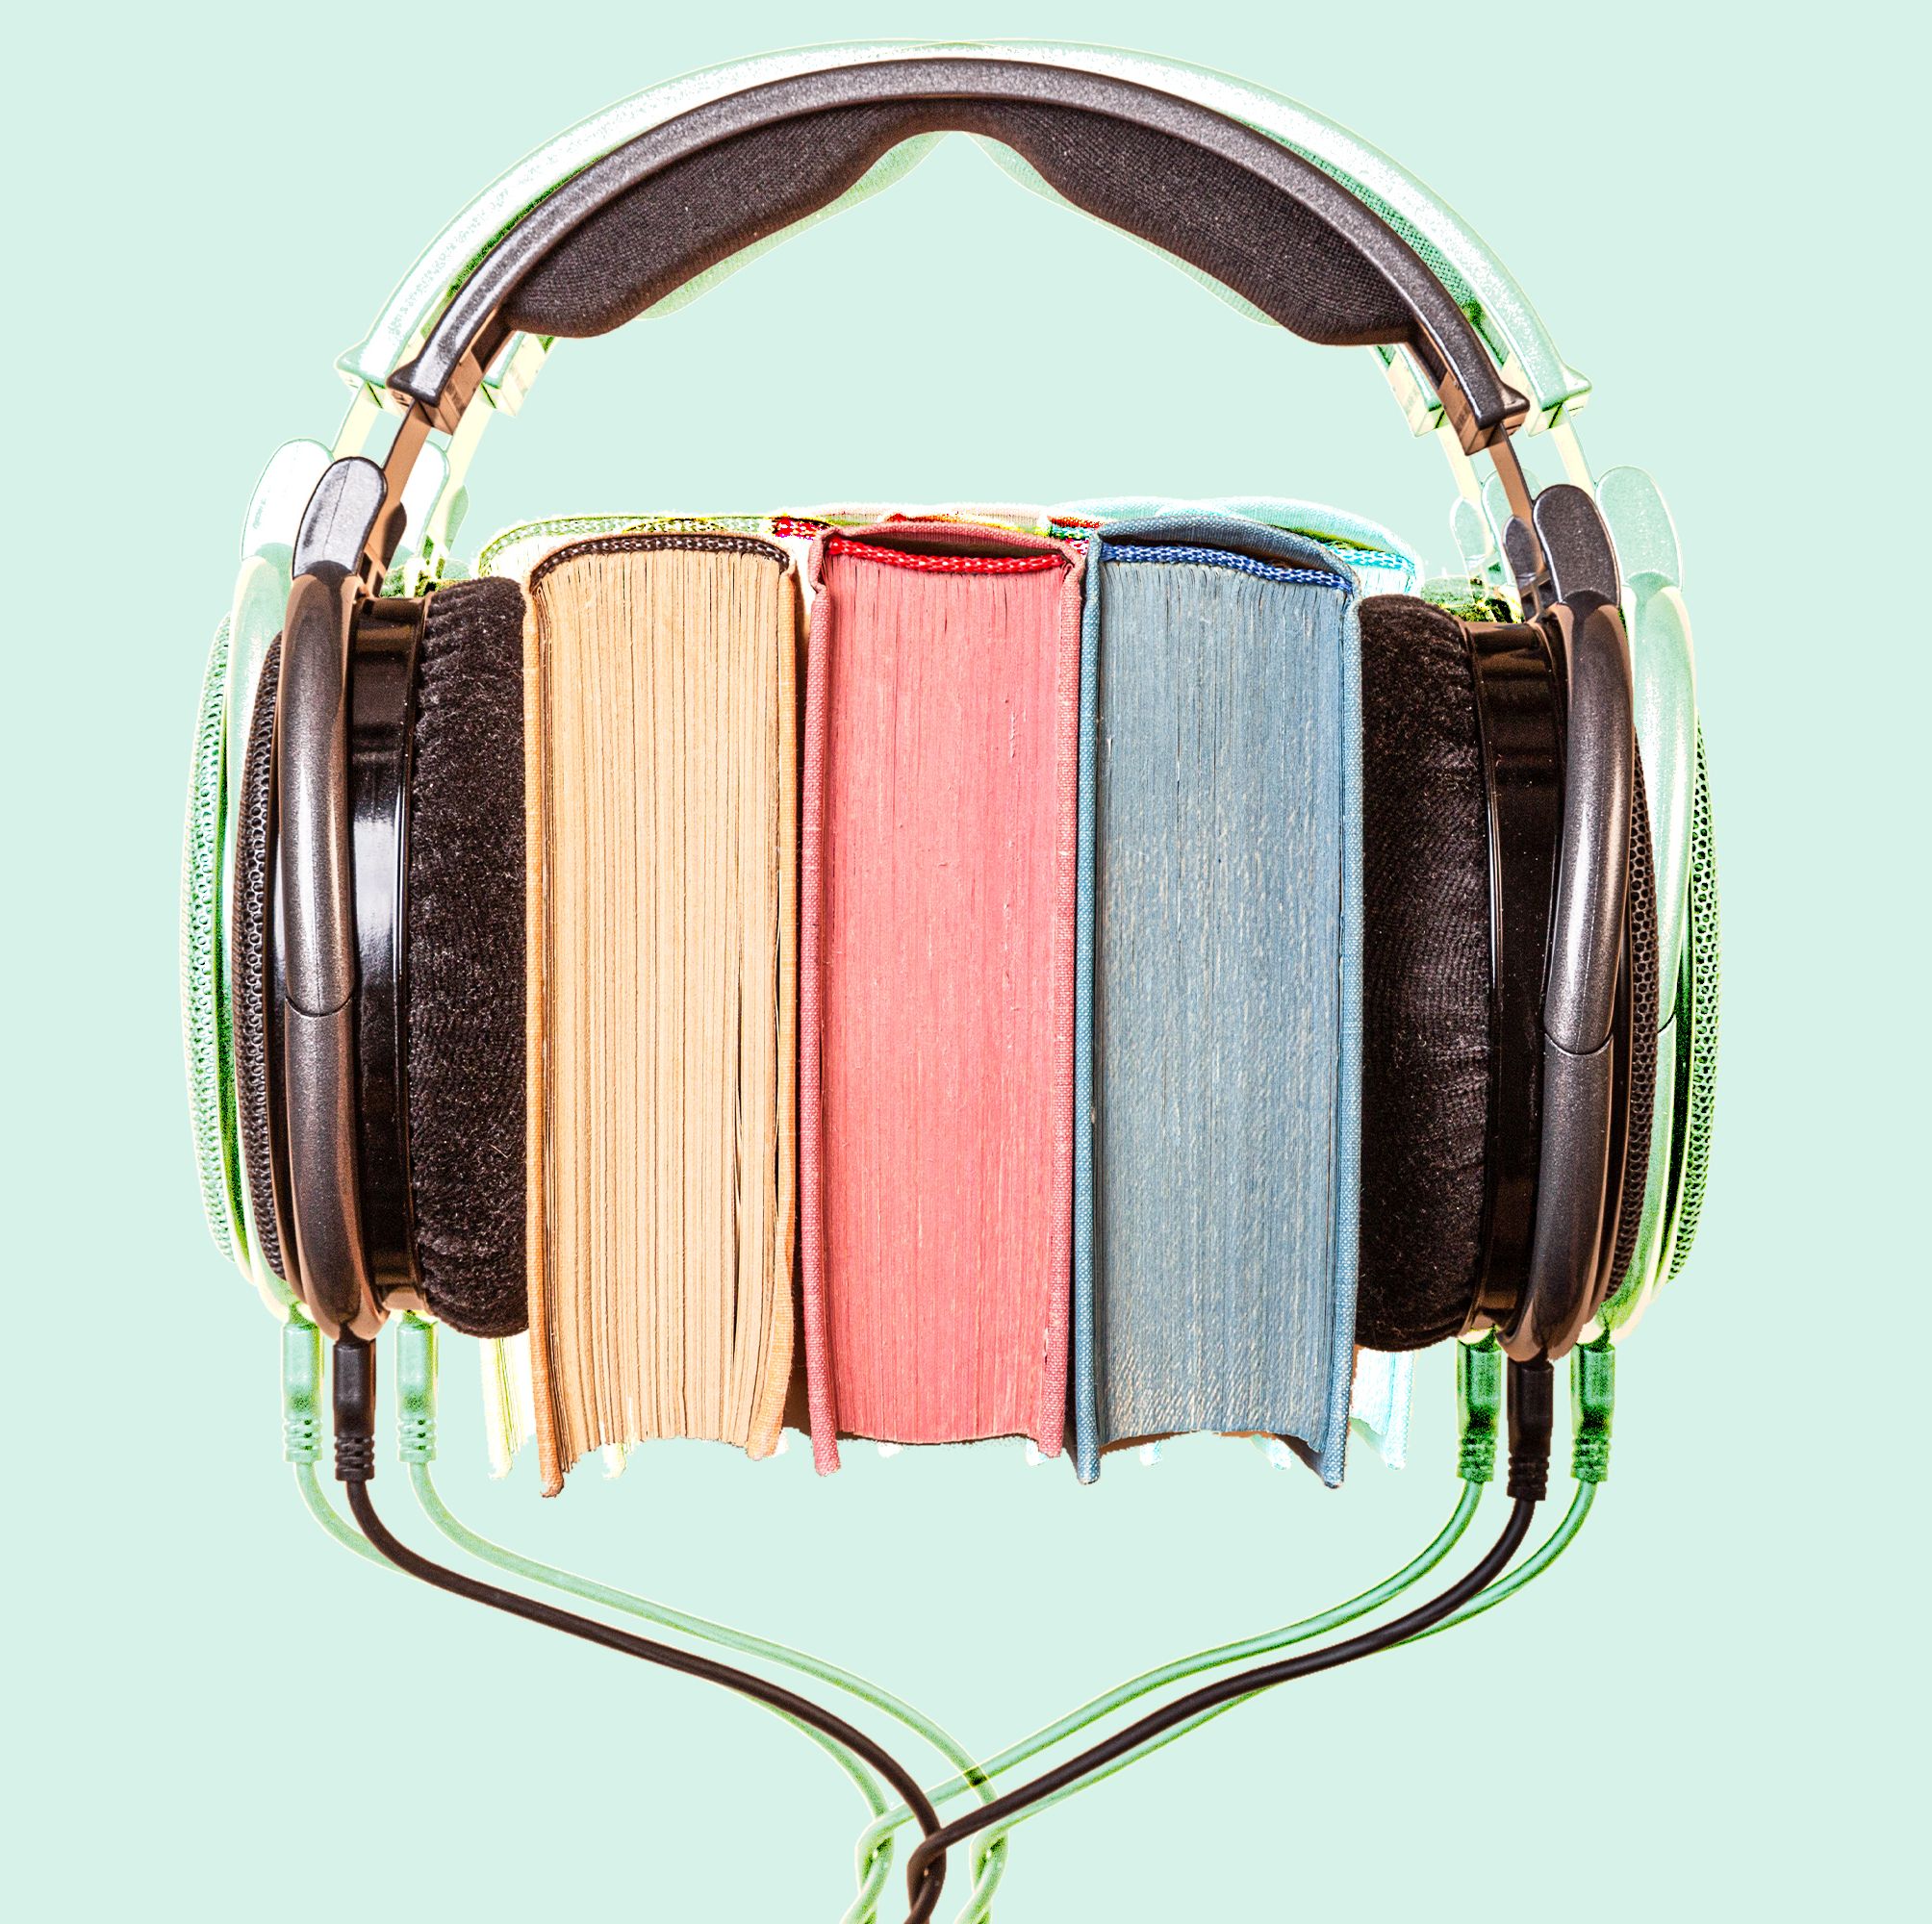 The 30 Best Audiobooks of All Time